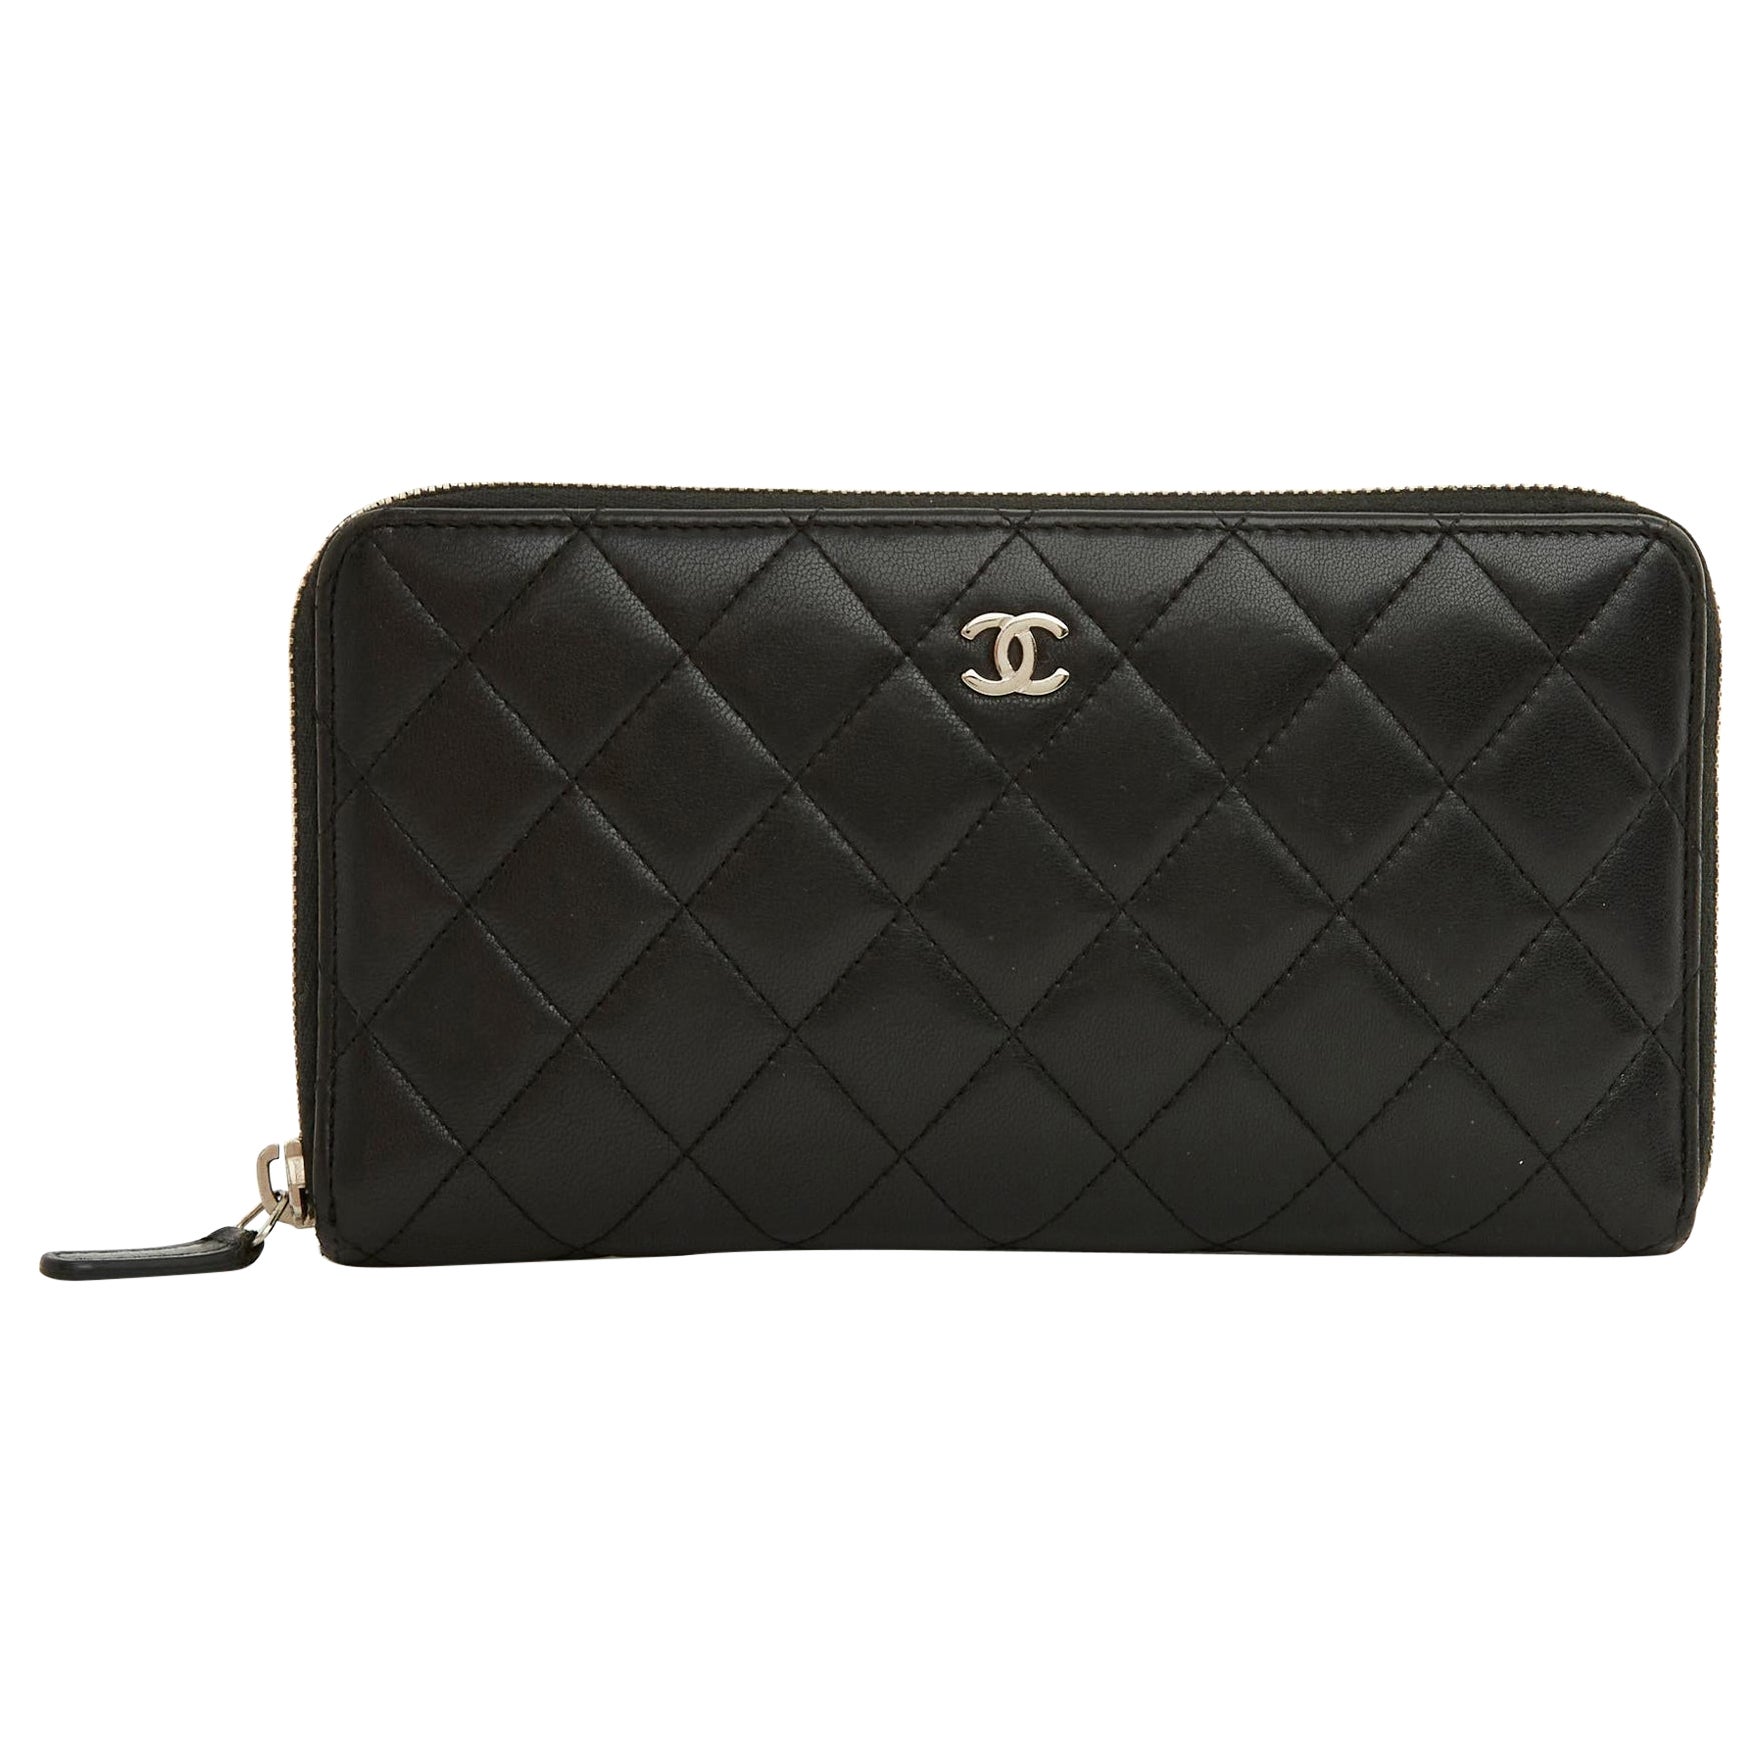 CHANEL Lucky Symbols Pochette Patent Leather Wallet on a Chain Black-US